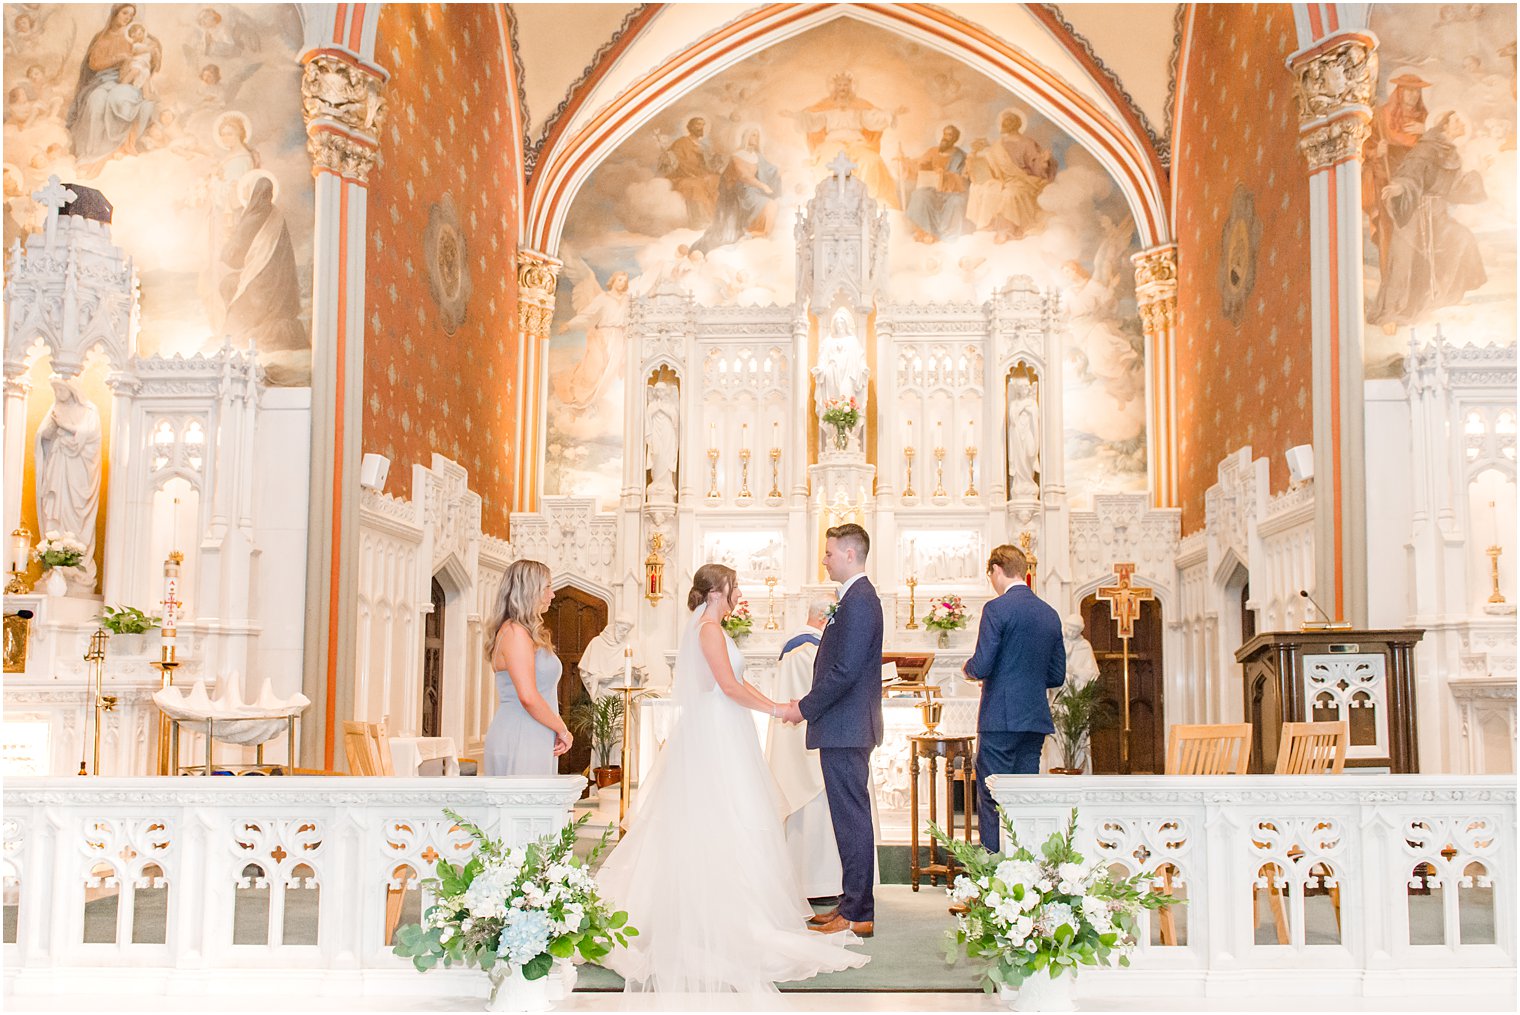 bride and groom stand exchanging vows during traditional church wedding ceremony at St. Peter's Church